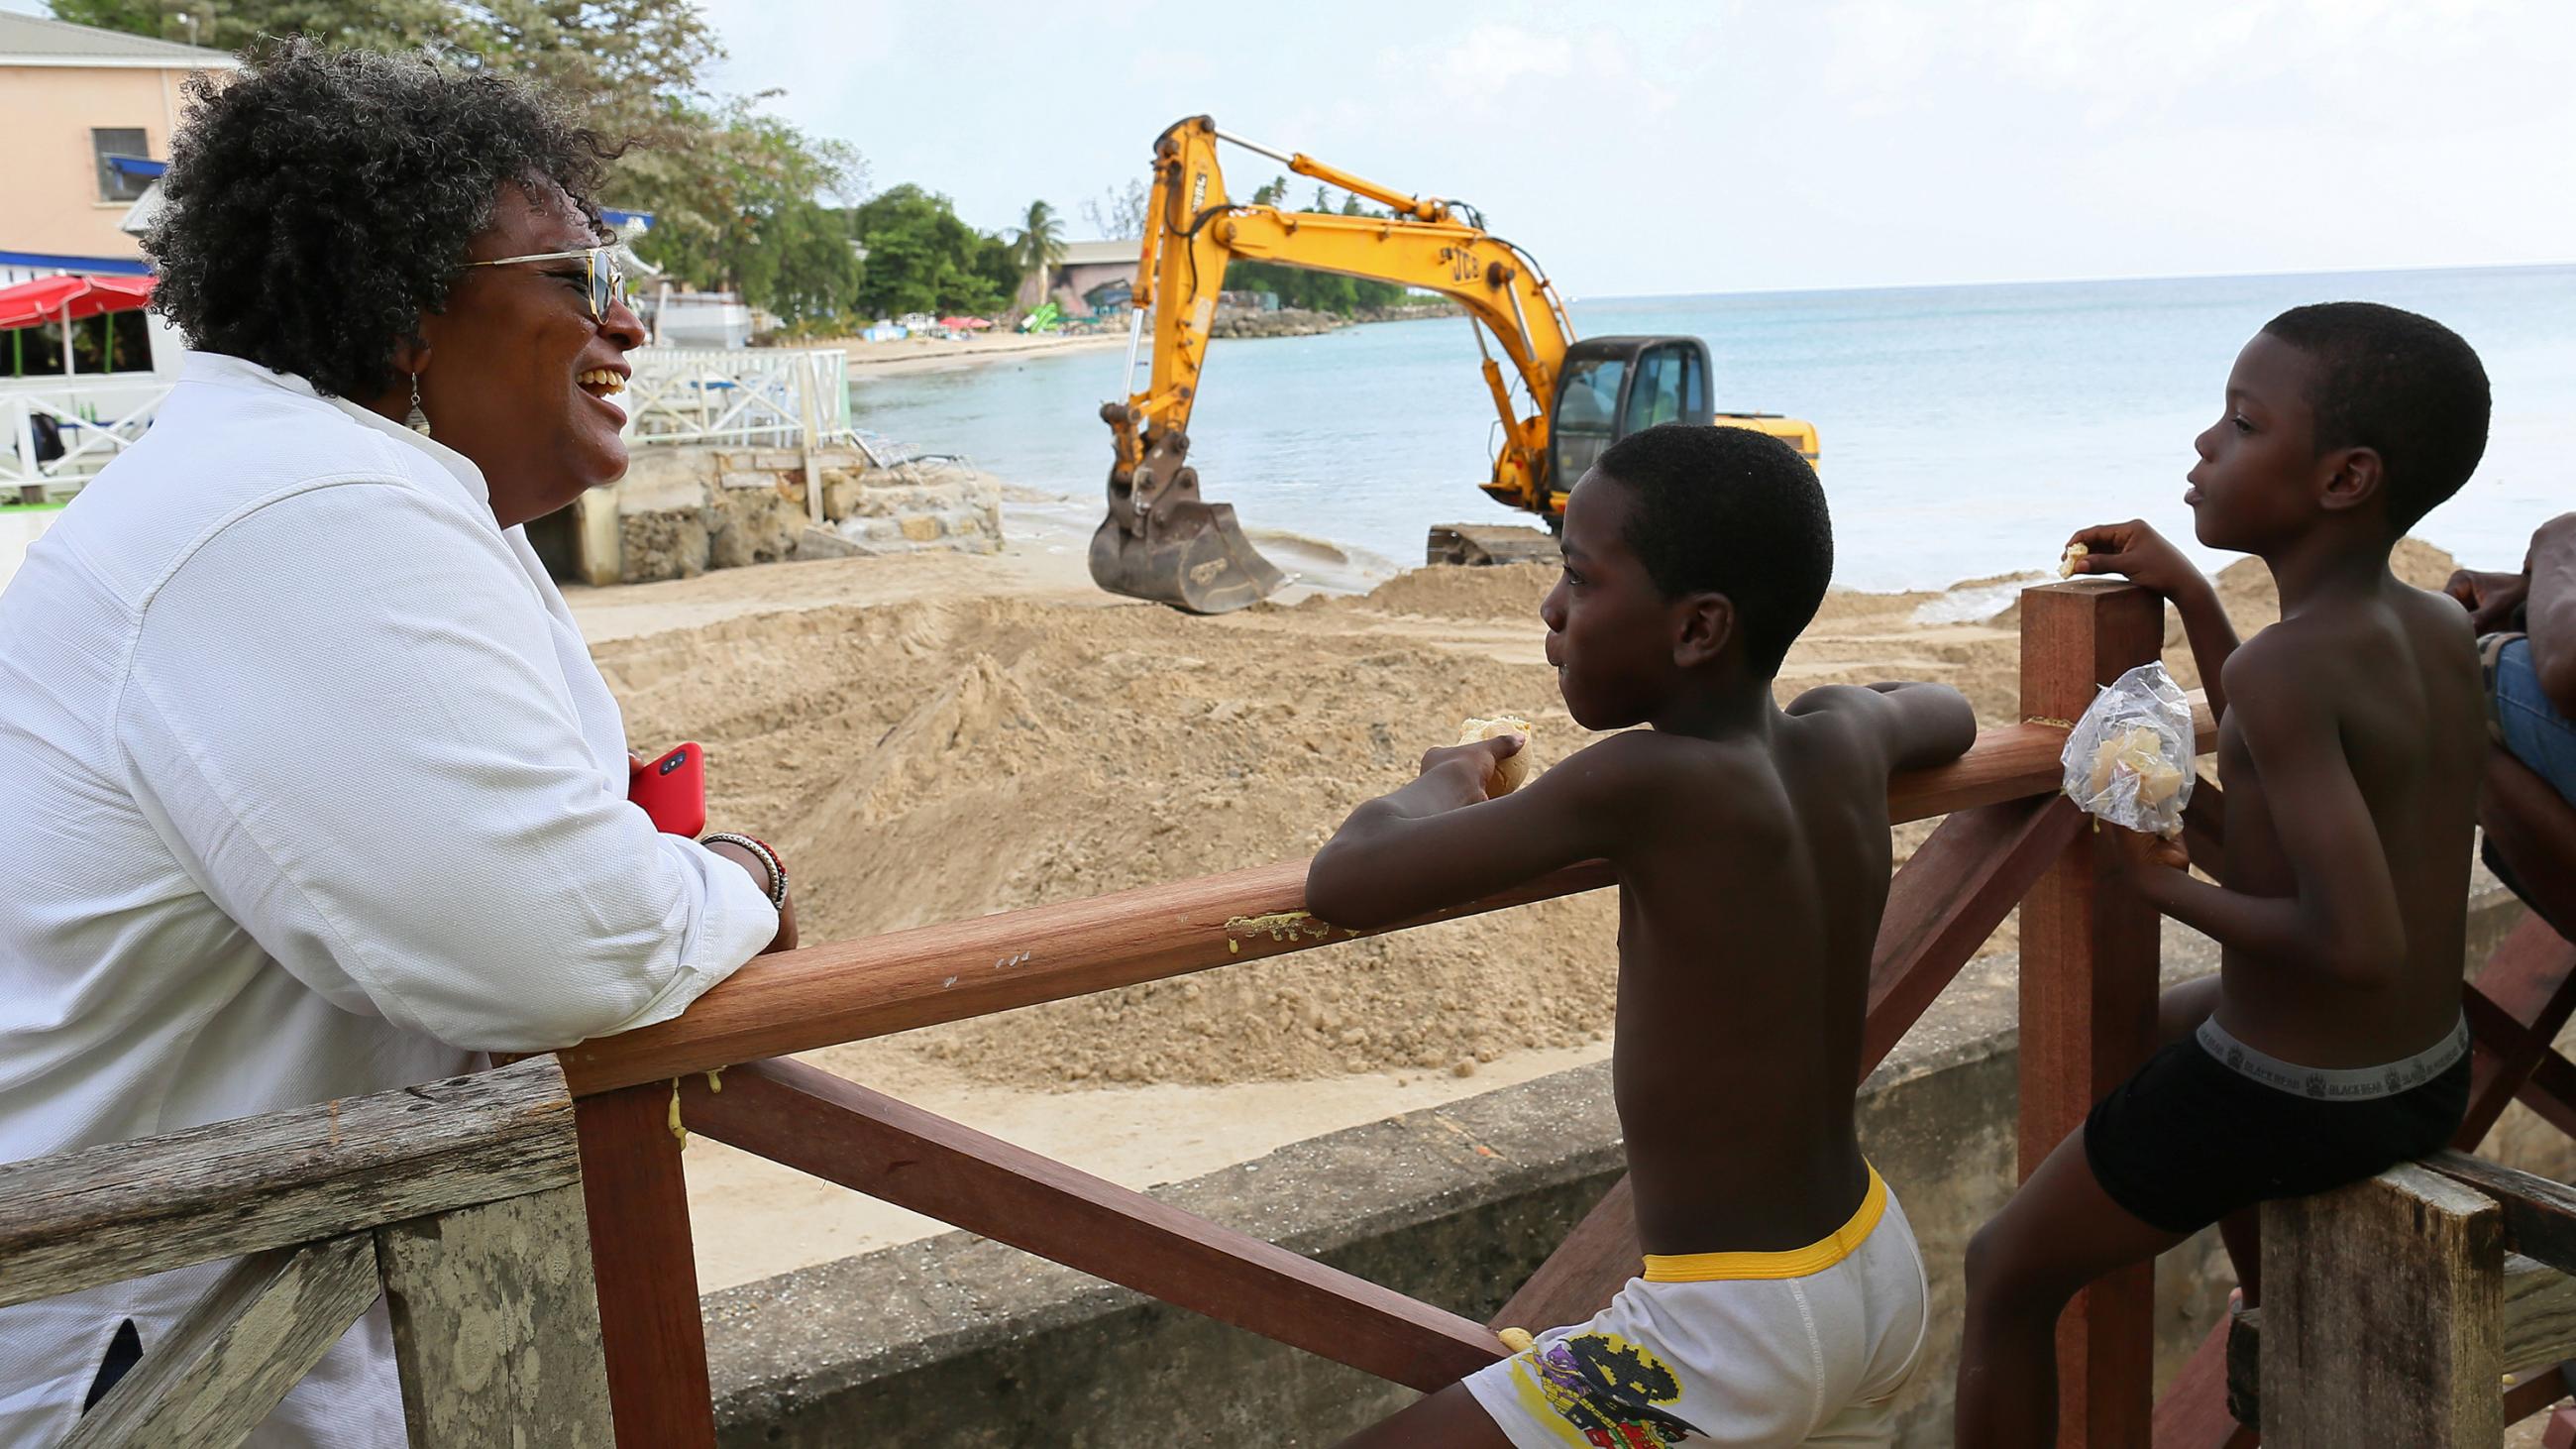 The photo shows the prime minister at the beach leaning on a rail talking to several young children. Construction machinery can be seen in the background. 